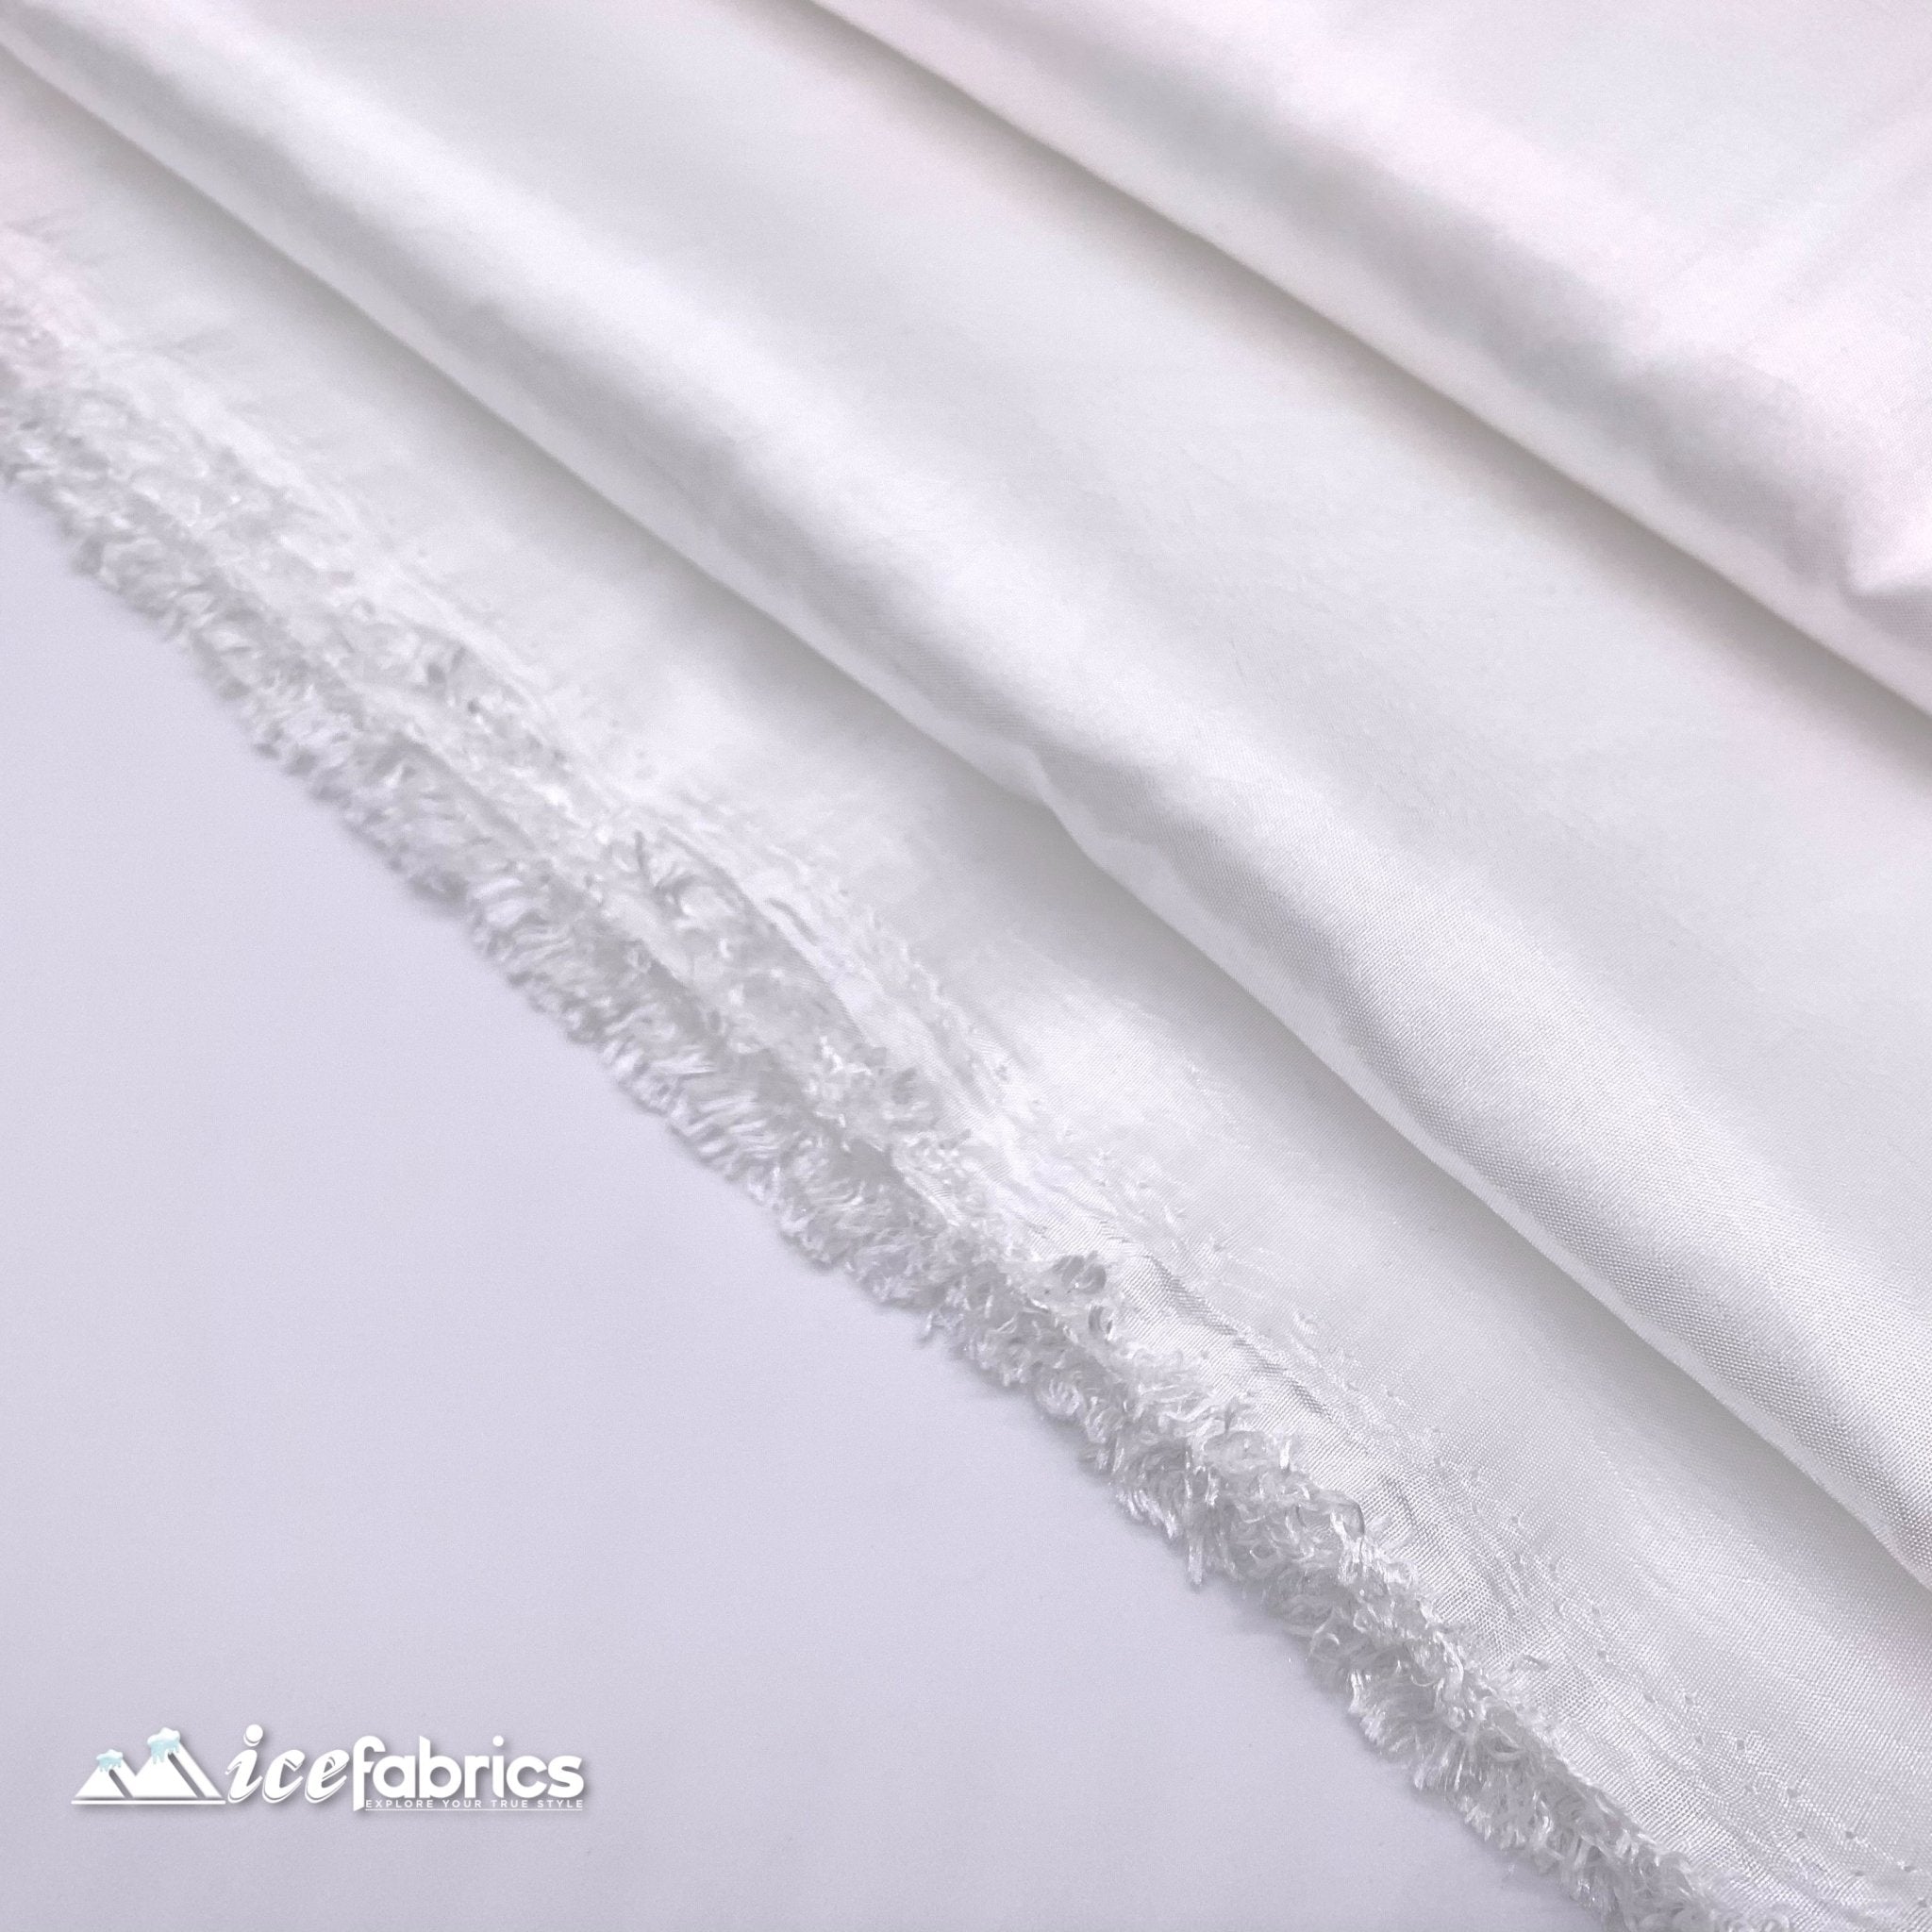 High Quality Solid Taffeta Fabric_ 60" Width_ By The YardTaffeta FabricICEFABRICICE FABRICSWhiteHigh Quality Solid Taffeta Fabric_ 60" Width_ By The YardTaffeta FabricICEFABRICICE FABRICSWhiteHigh Quality Solid Taffeta Fabric_ 60" Width_ By The Yard ICEFABRIC White